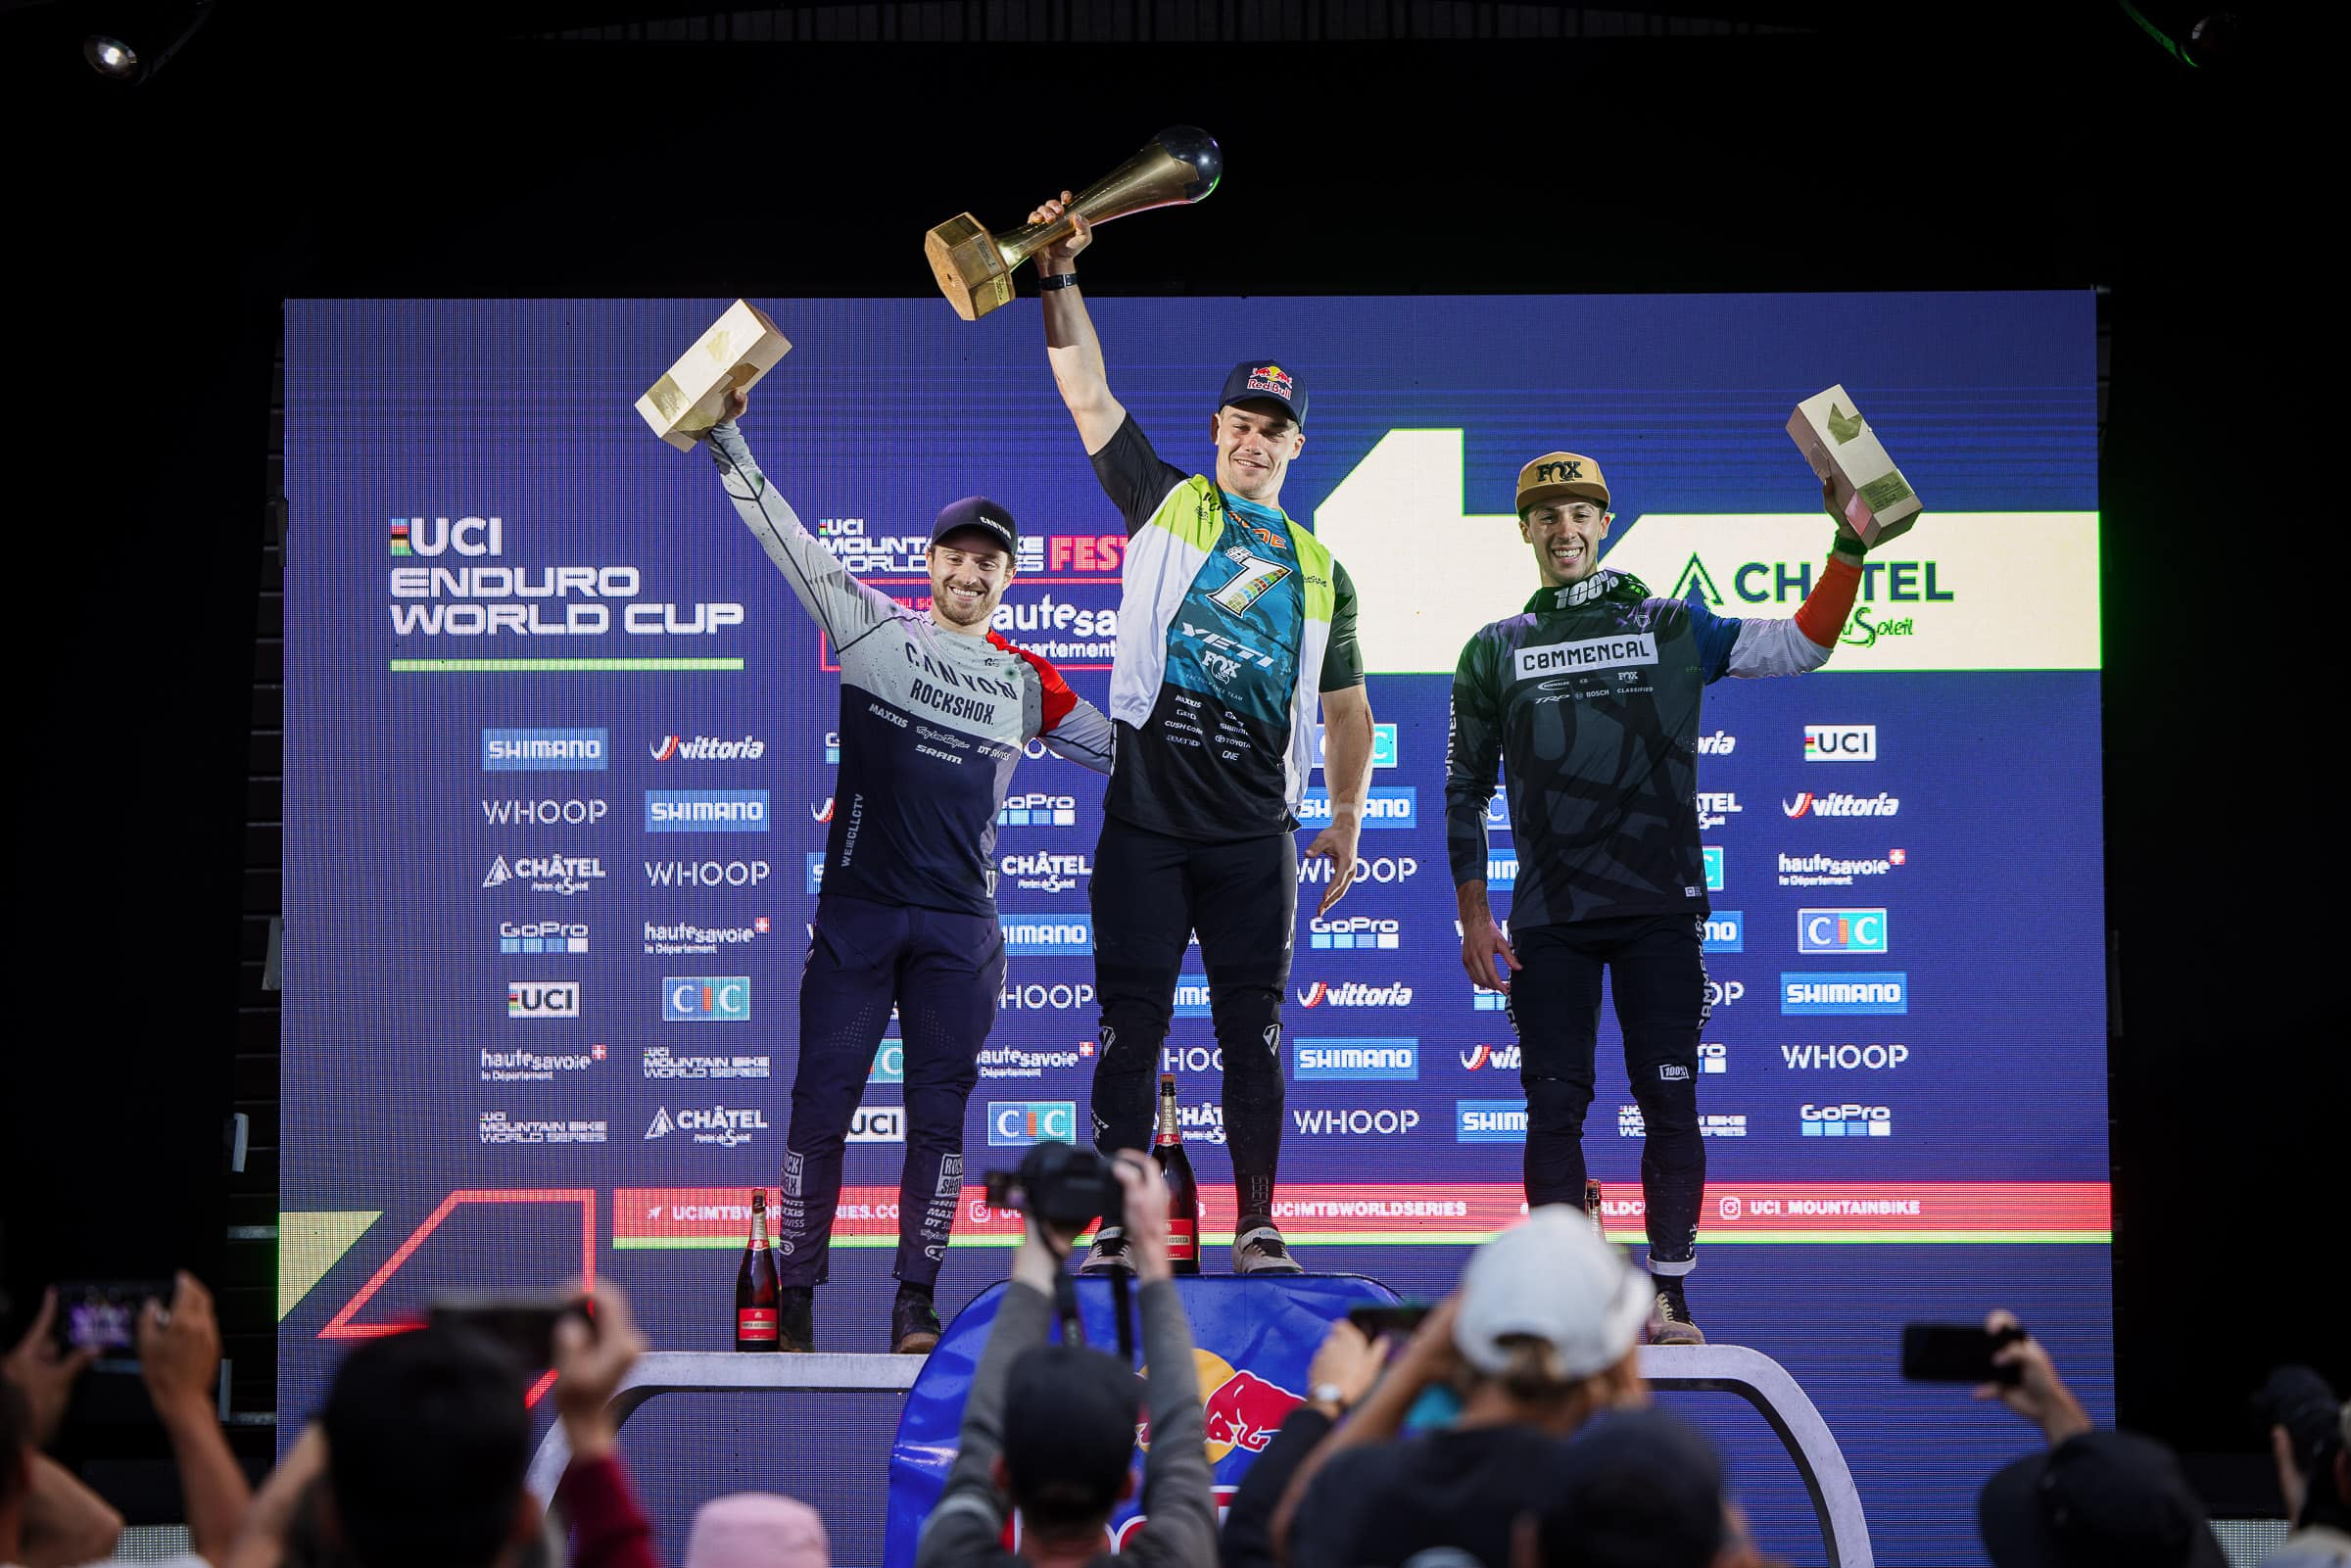 UCI Enduro World Cup enjoys record views and rider attendance